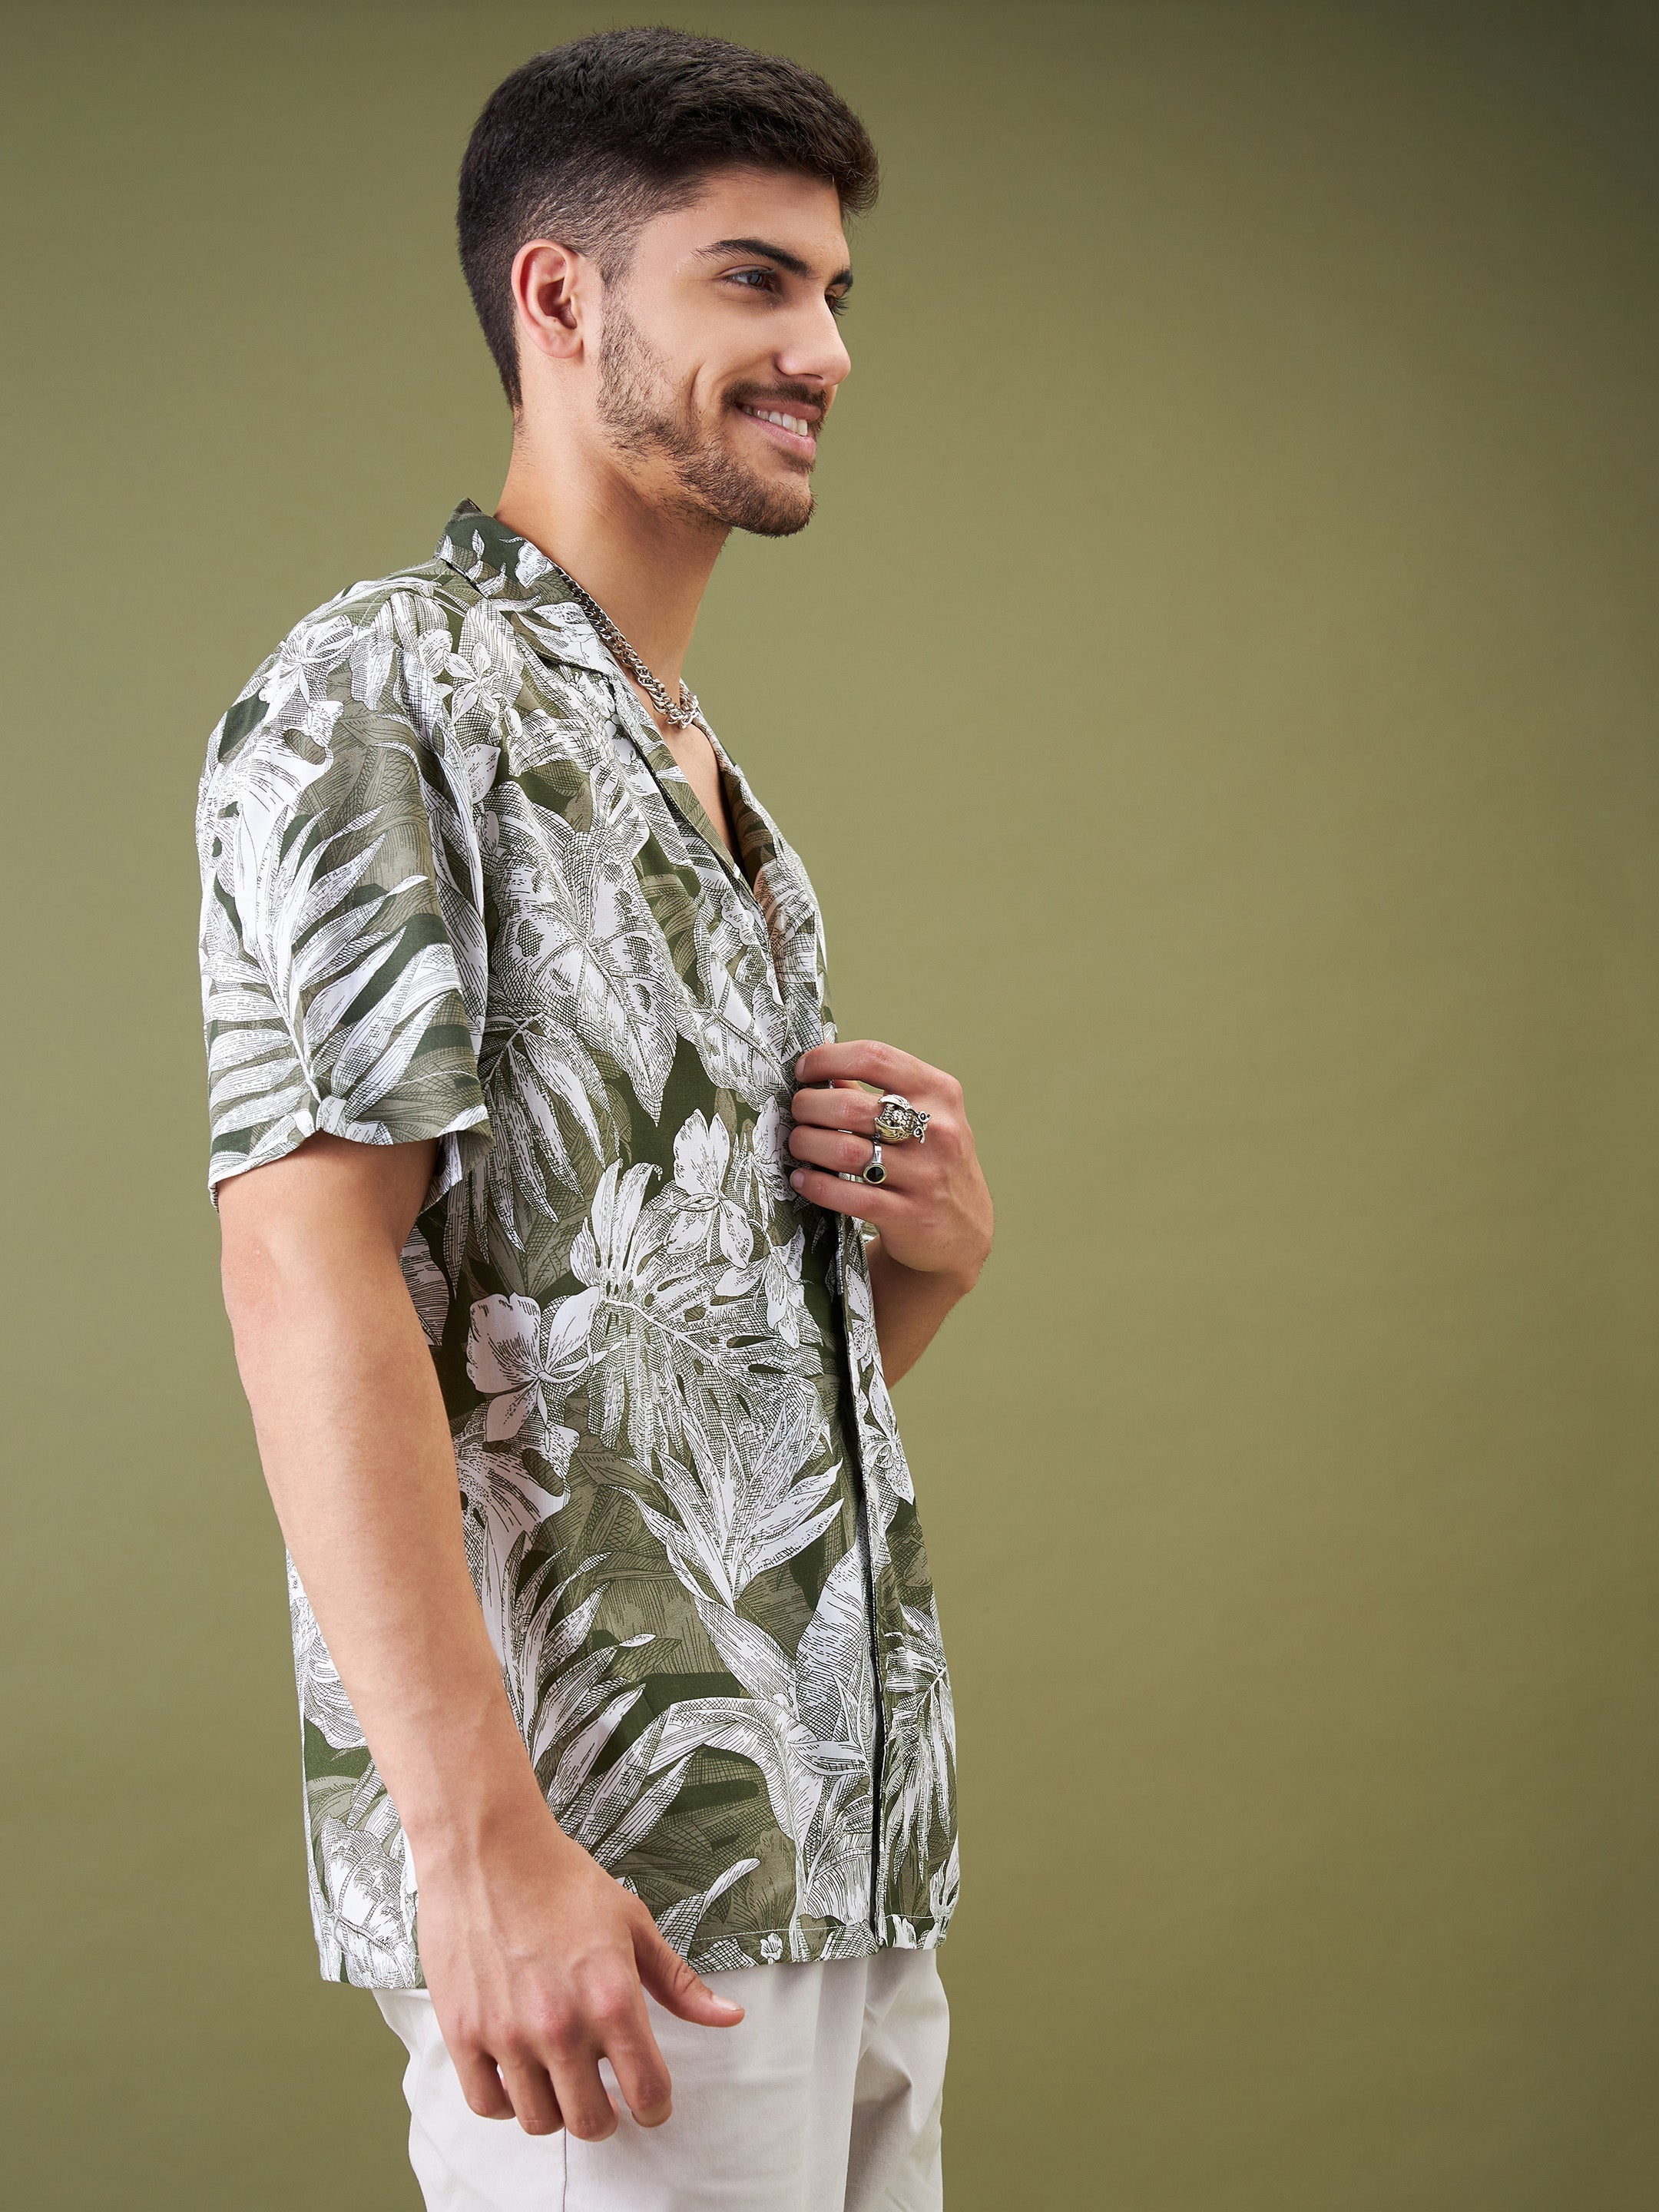 Unisex Olive & Whie Tropical Floral Relax Fit Shirt - MASCLN SASSAFRAS